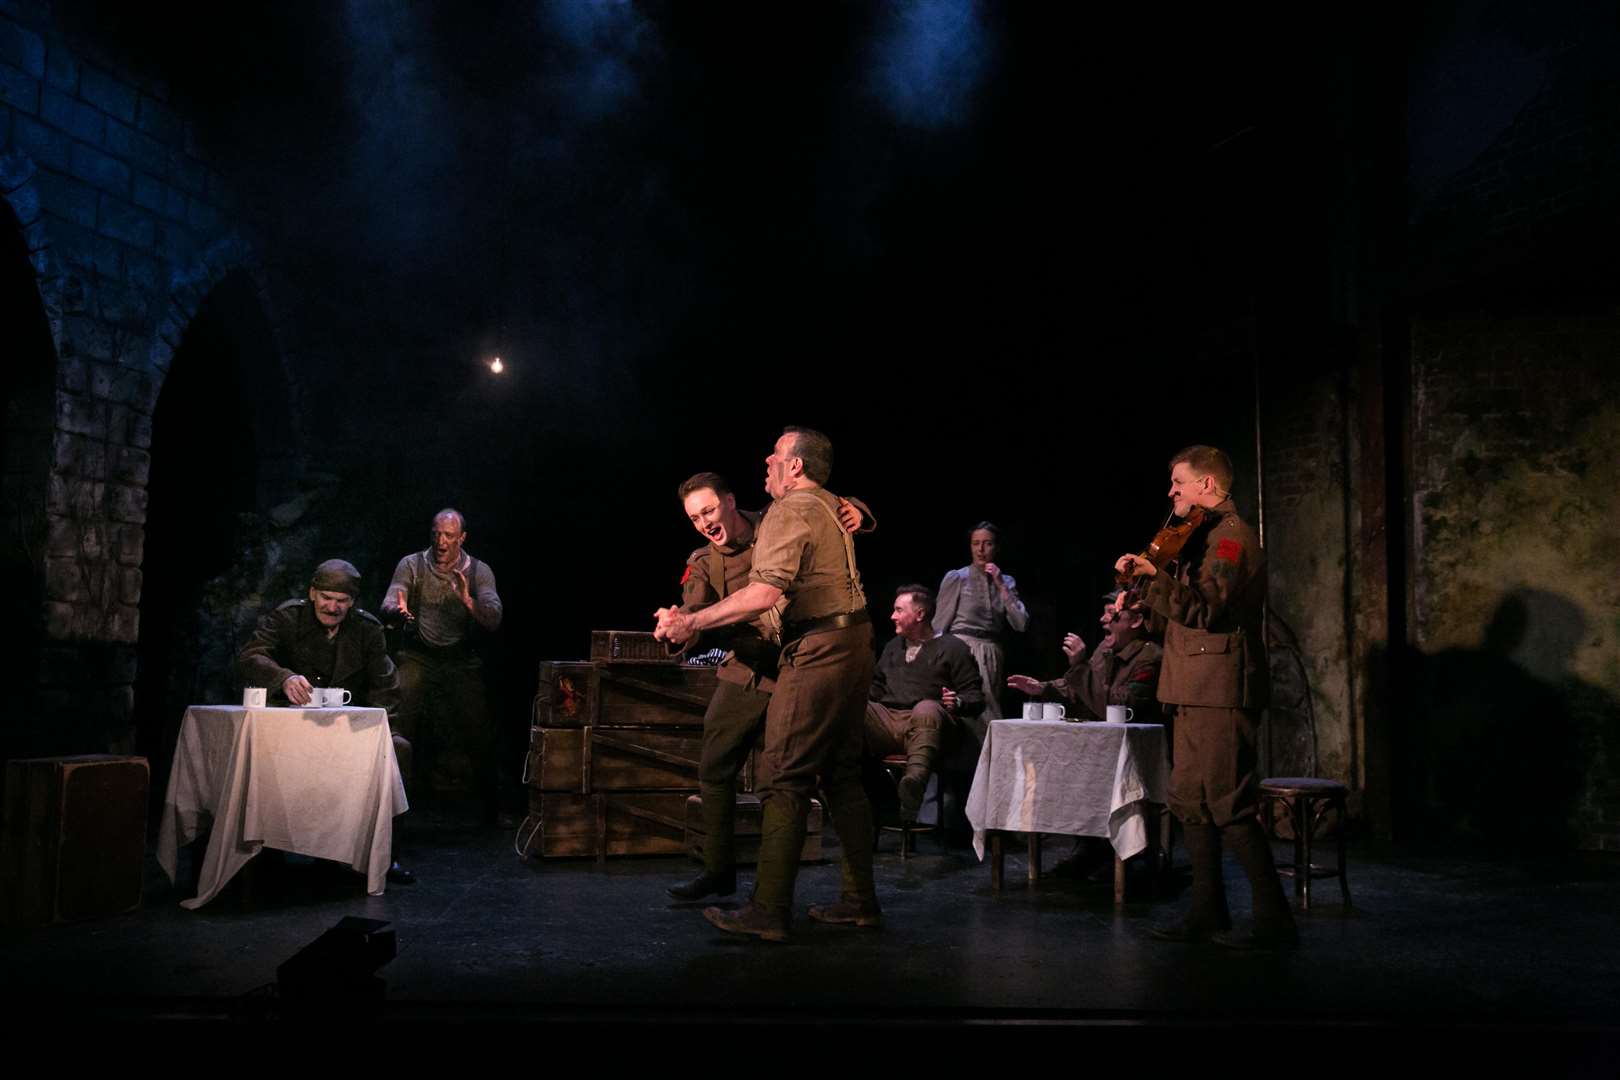 Alfie Browne-Sykes (Tipper) and Simon Lloyd (Shaw) in Birdsong